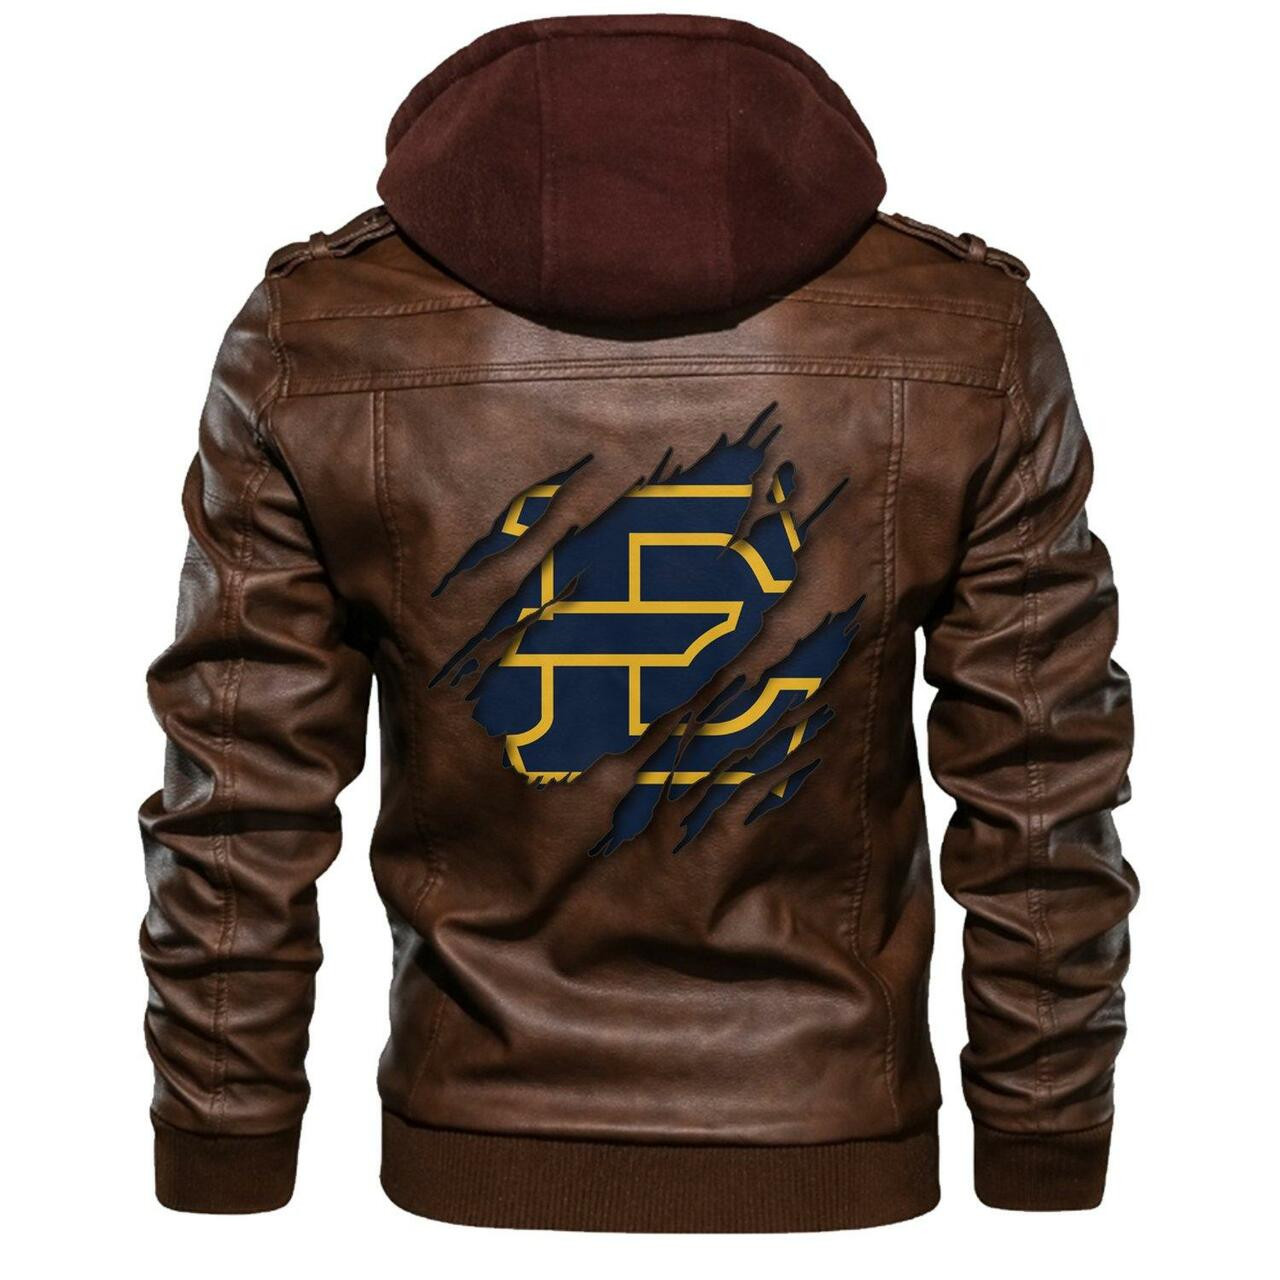 Are you looking for a great leather jacket? 175